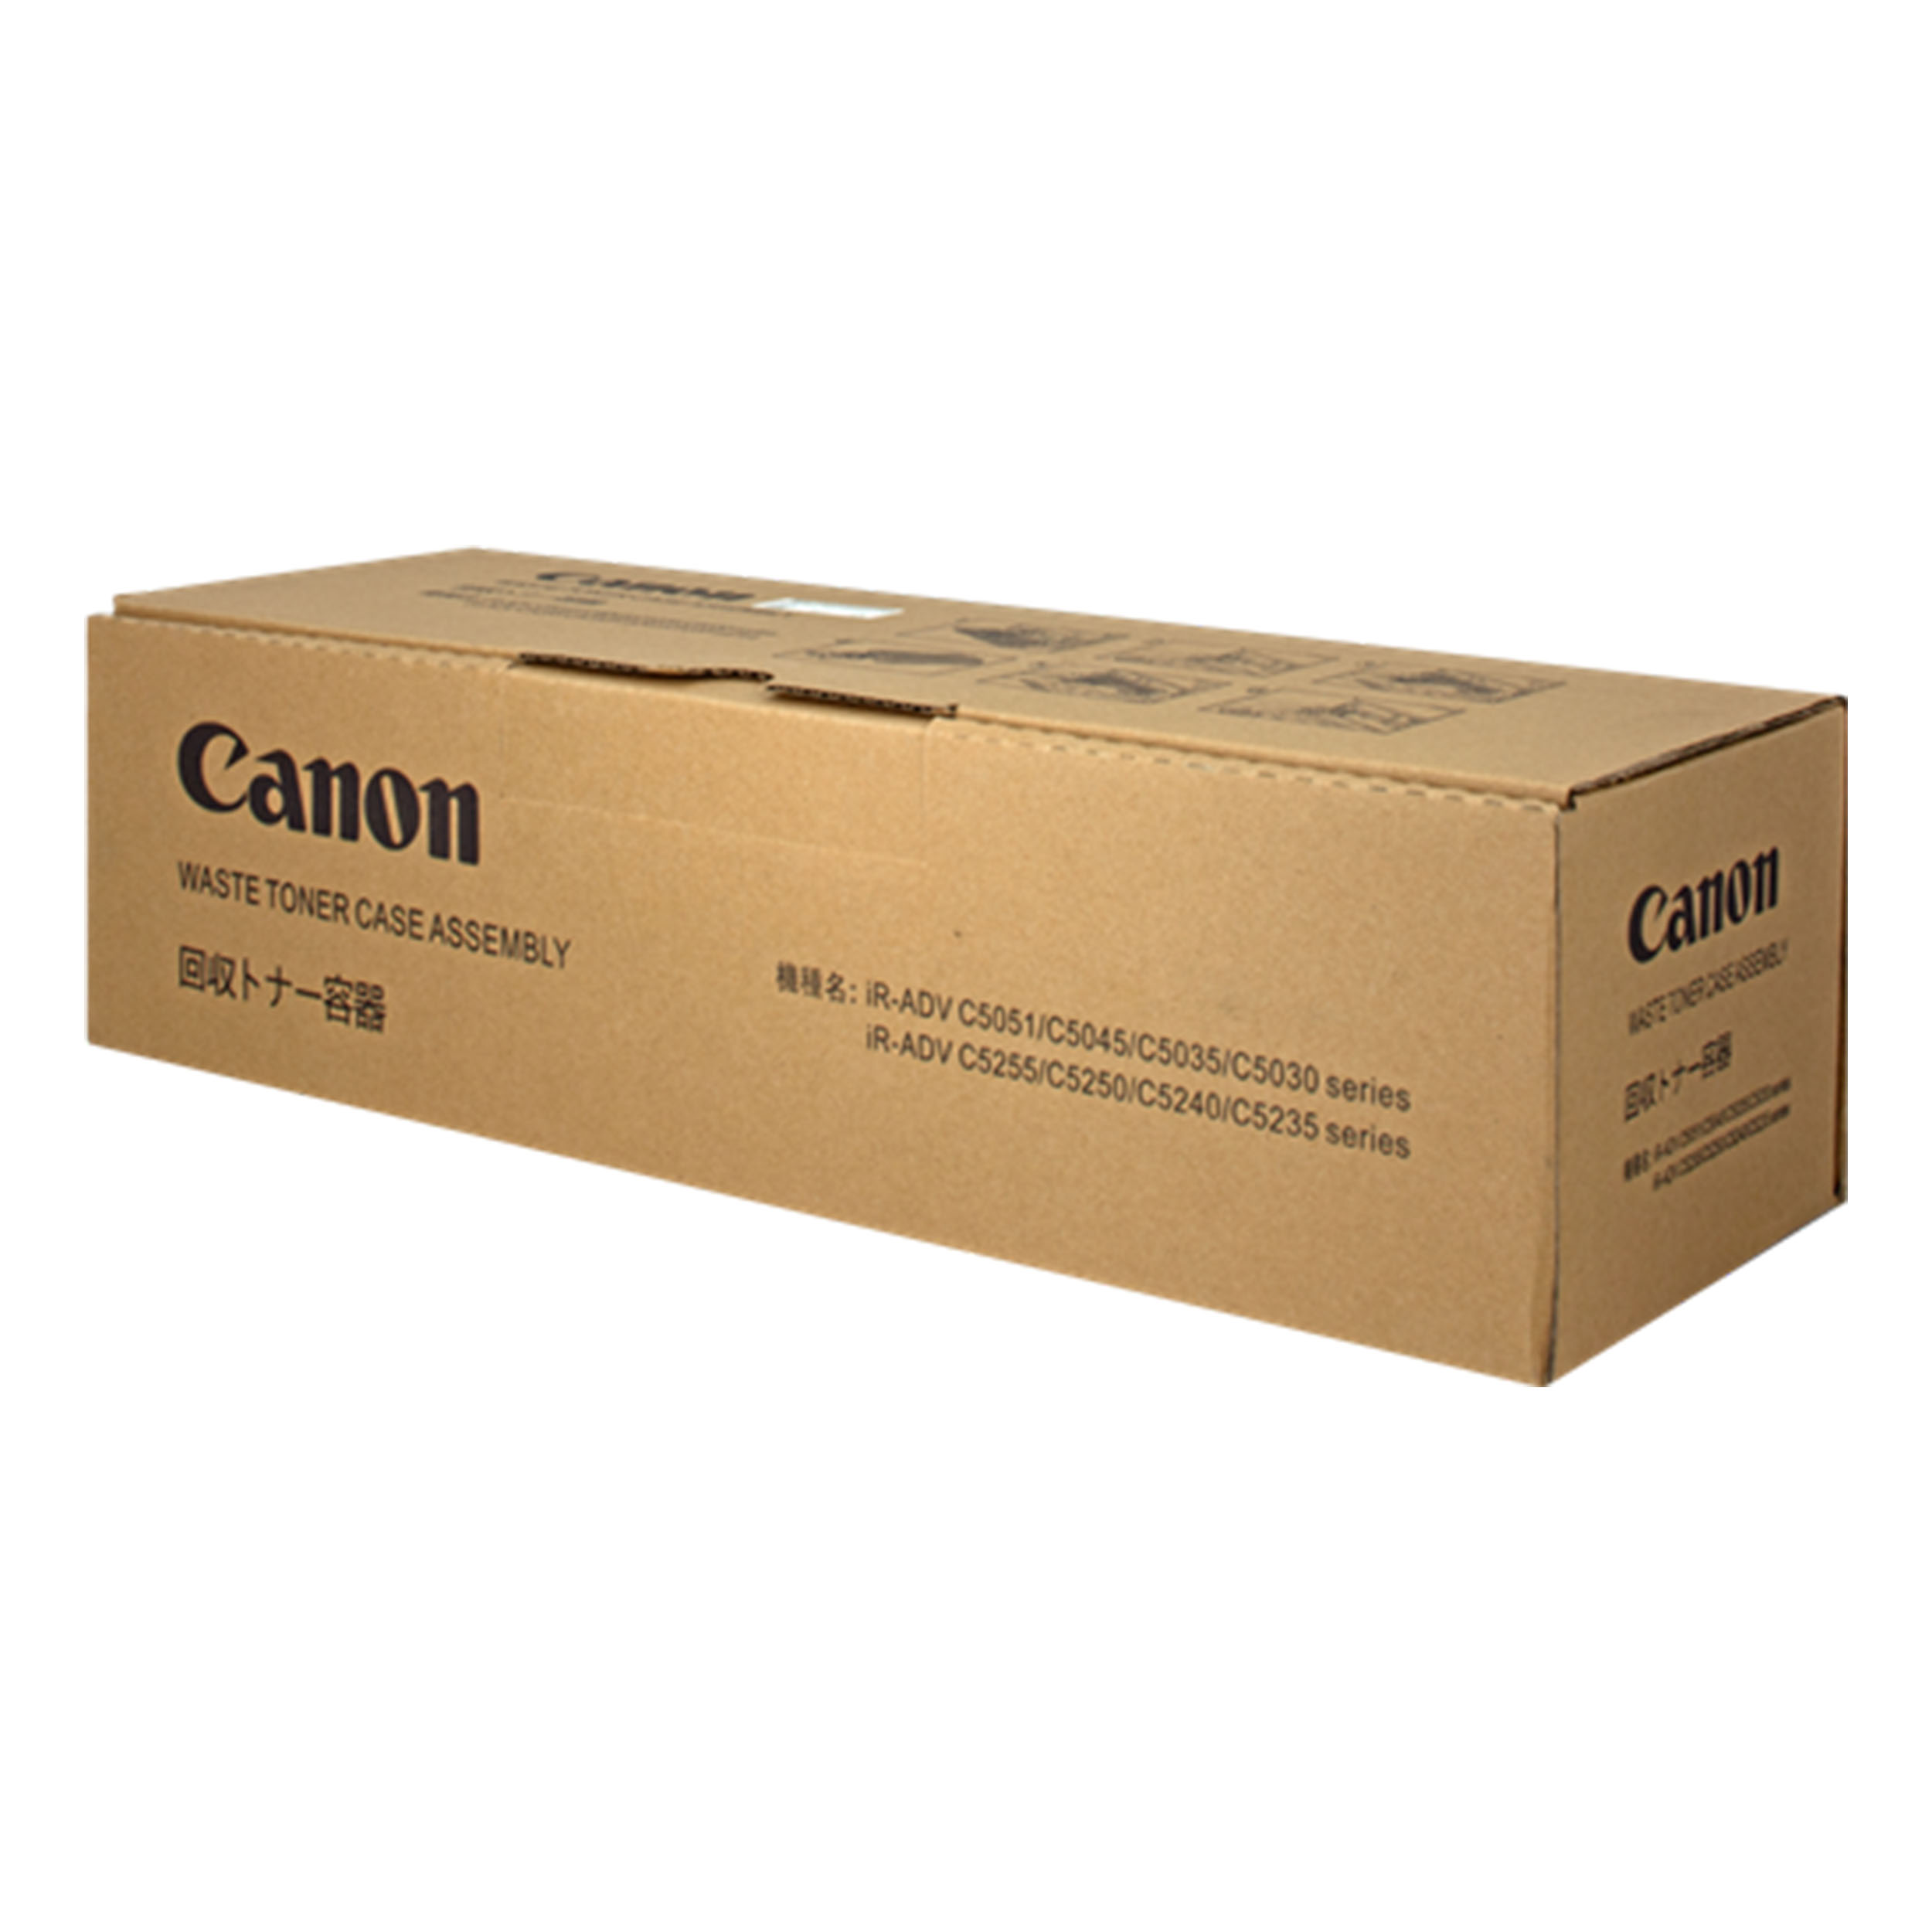 Genuine Waste Toner For Canon imageRUNNER ADVANCE C5250 - Clear Choice Technical Services